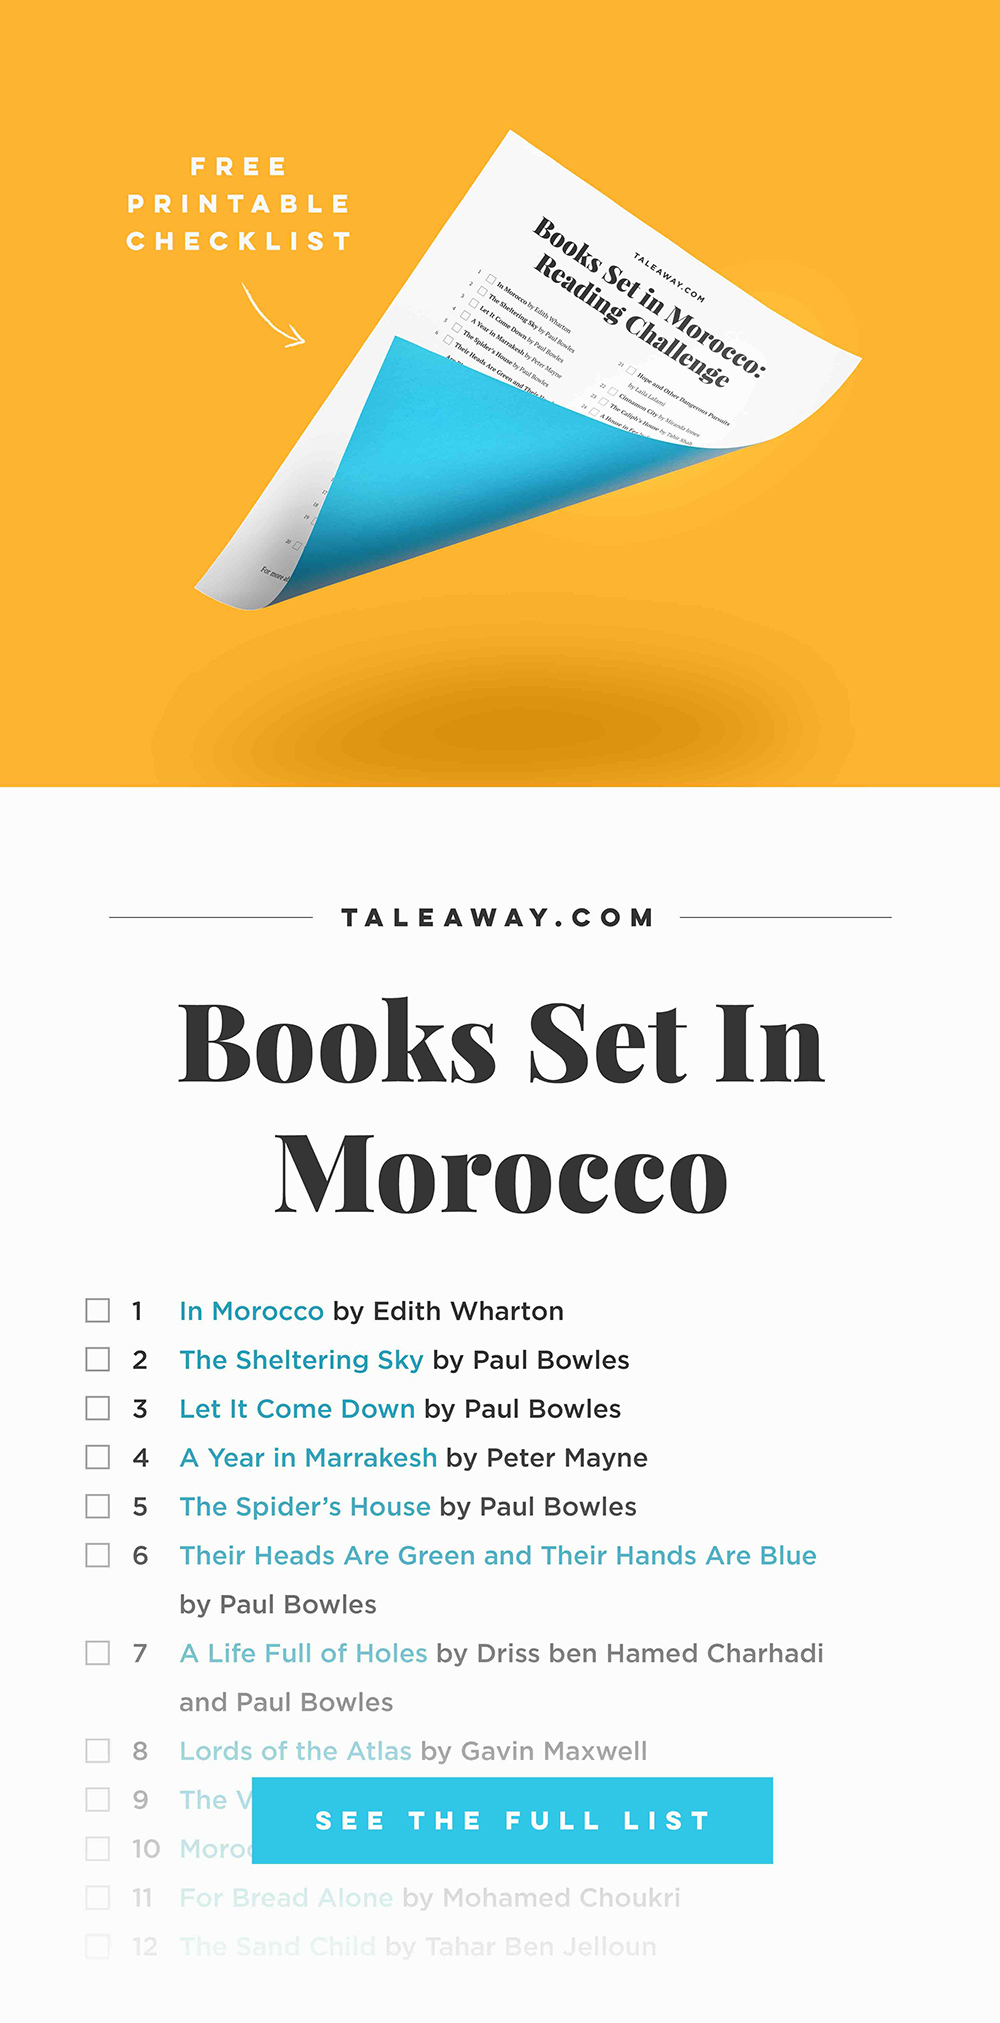 Books Set In Morocco. Visit www.taleway.com for books set around the world. moroccan books, books morocco, morocco book, books about morocco, morocco inspiration, morocco travel, morocco reading, morocco reading challenge, morocco packing, marrakesh book, marrakesh inspiration, marrakesh travel, travel reading challenge, fes travel, casablanca travel, tangier travel, desert travel, books around the world, books to read, books set in different countries, morocco bookshelf, morocco africa, books set in africa, morocco culture, morocco history, morocco author, books and travel, reading list